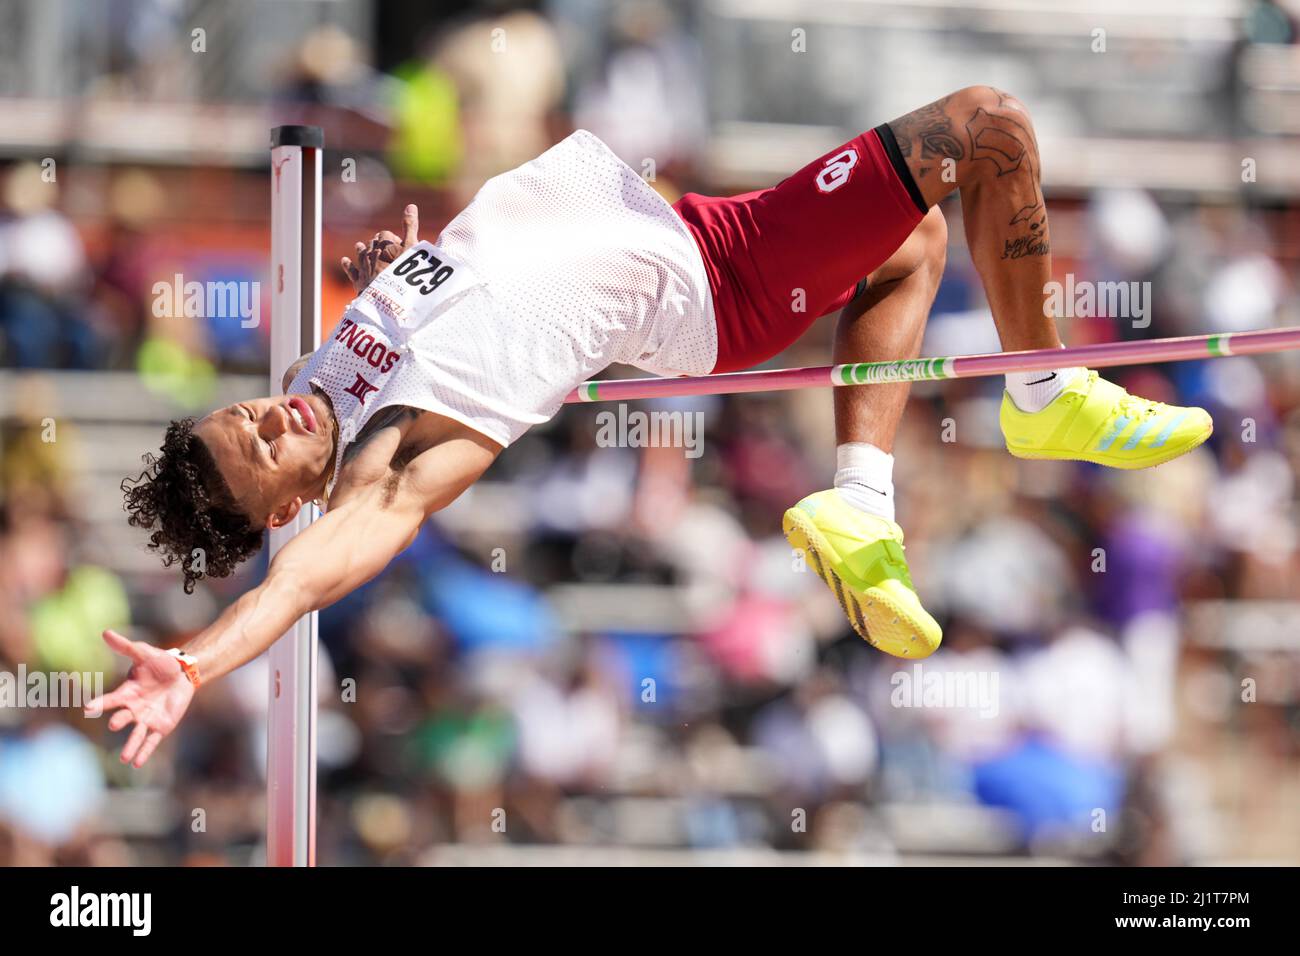 Vernon Turner of Oklahoma wins the high jump at 7-6 1/2 (2.30m) during the 94th Clyde Littlefield Texas Relays, Saturday, Mar. 26, 2022, in Austin, Te Stock Photo